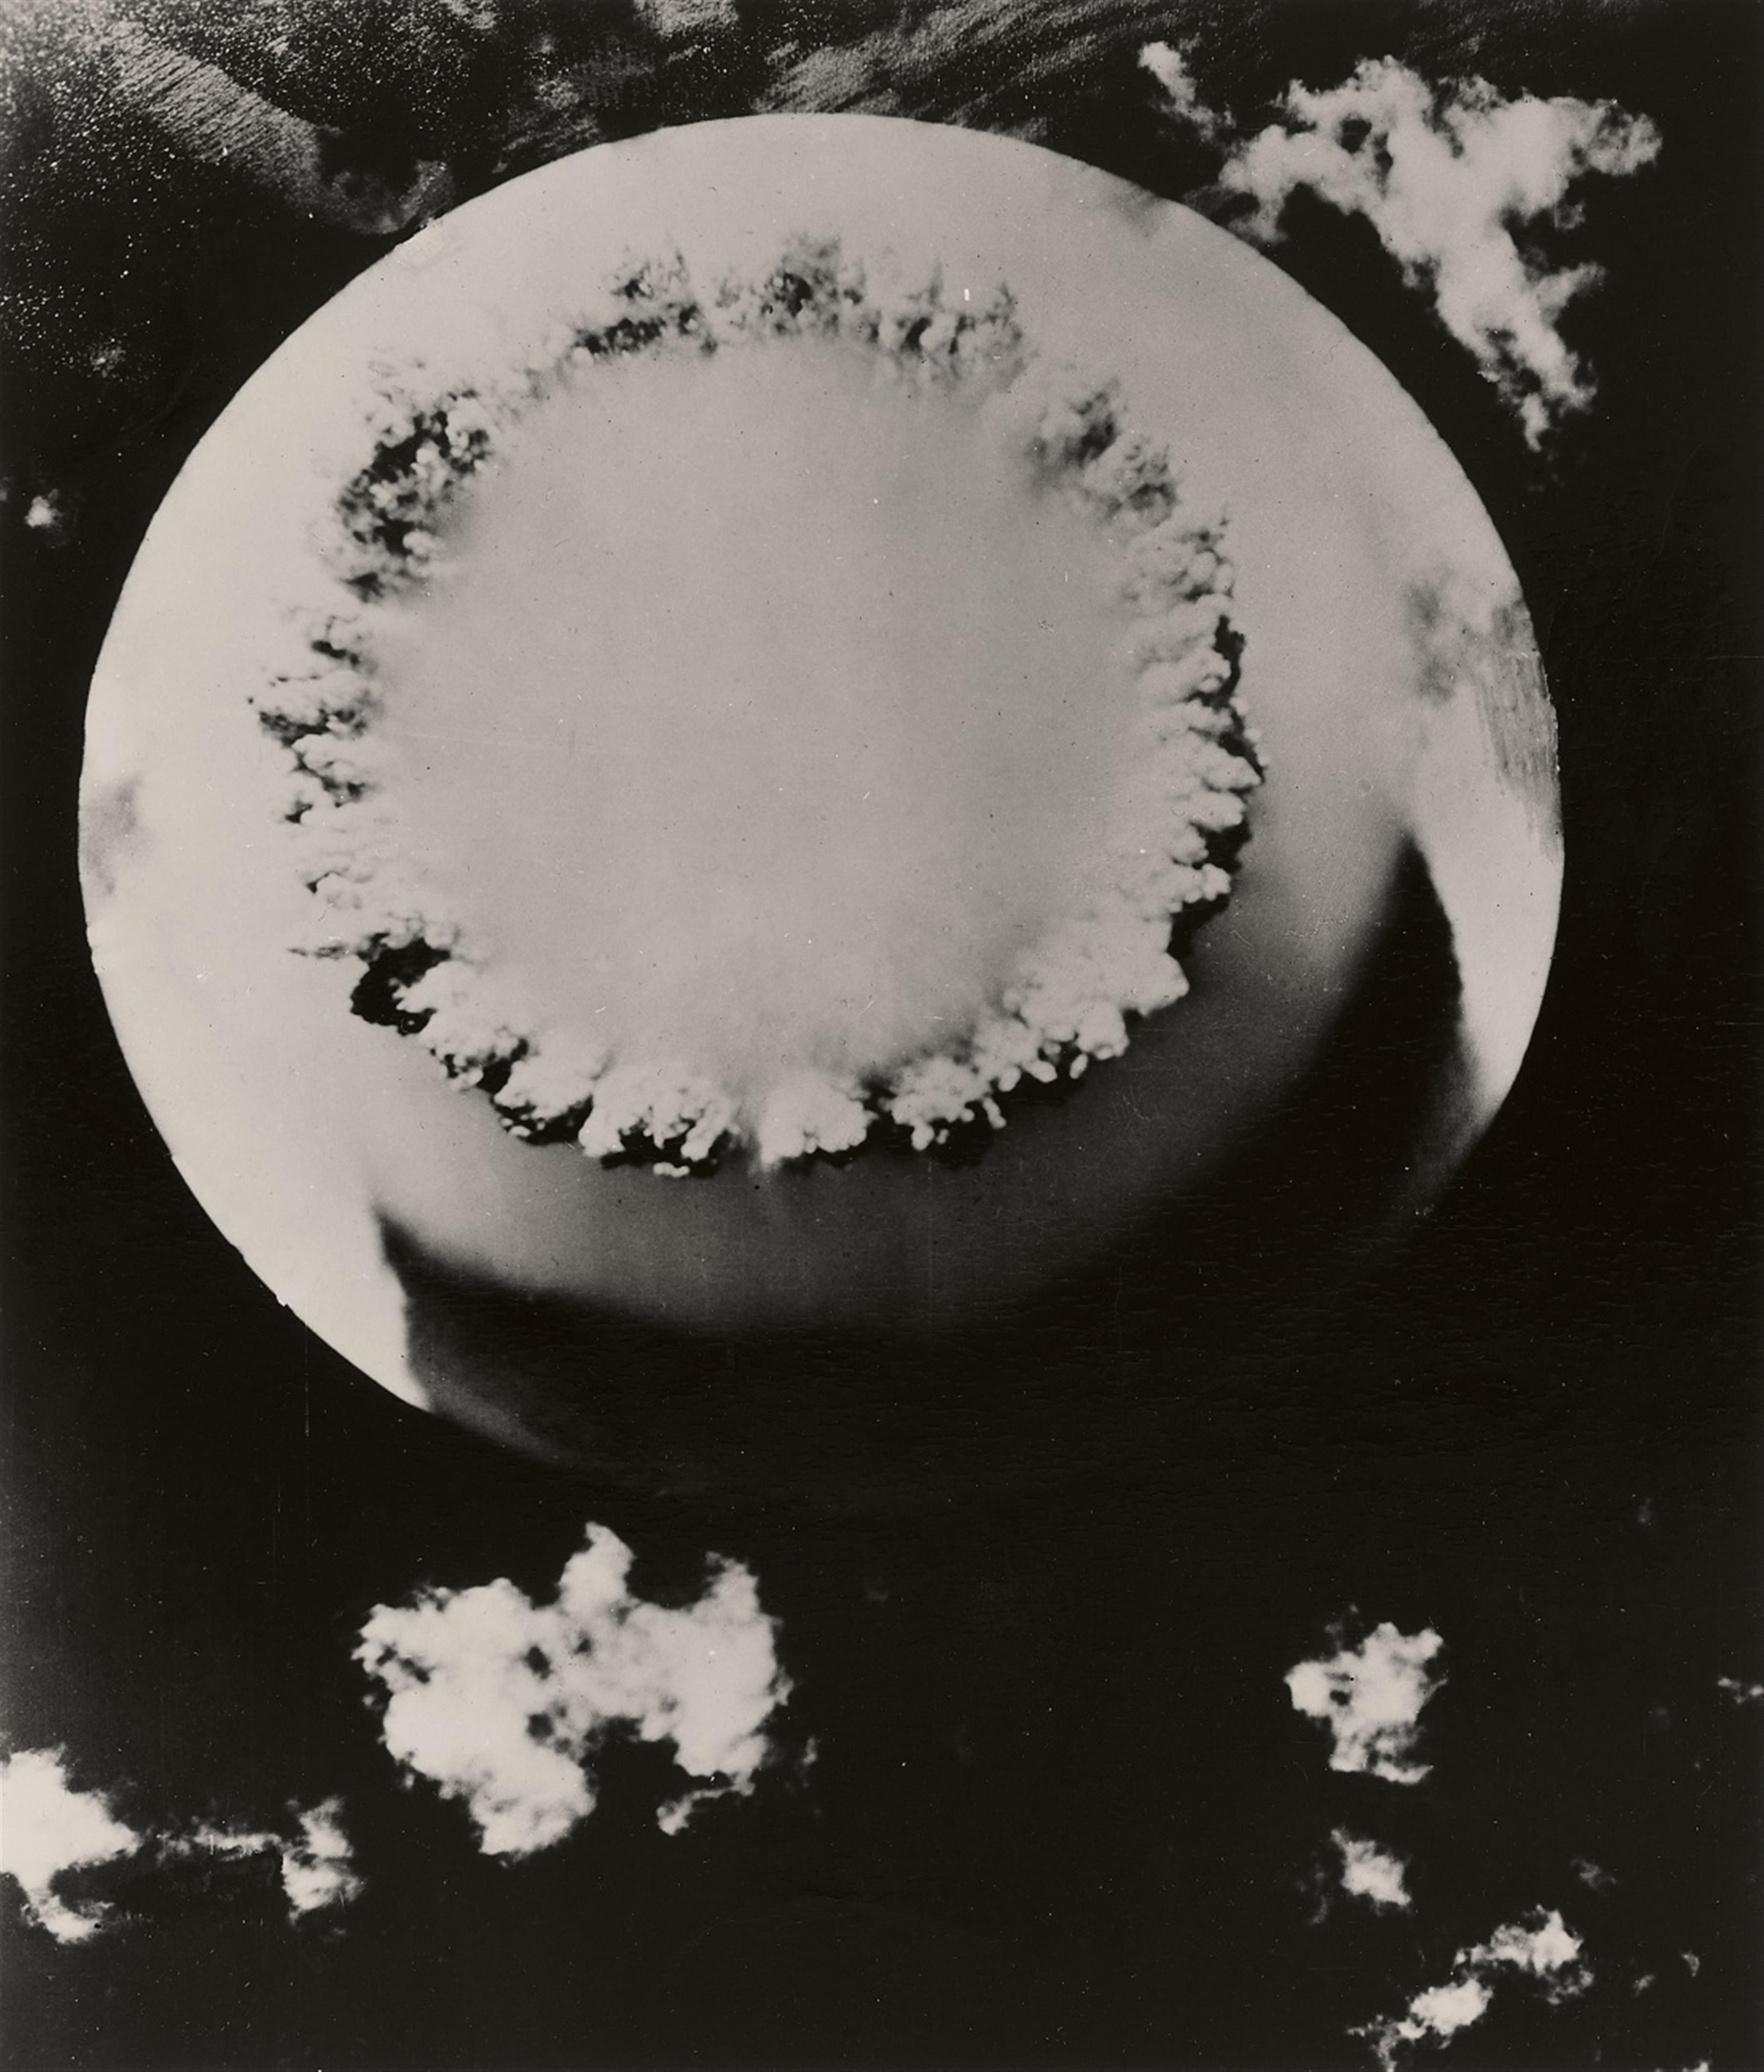 Joint Army Task Force One Photo - "Operation Crossroads" - Views of the Bikini Atoll nuclear Tests - image-6